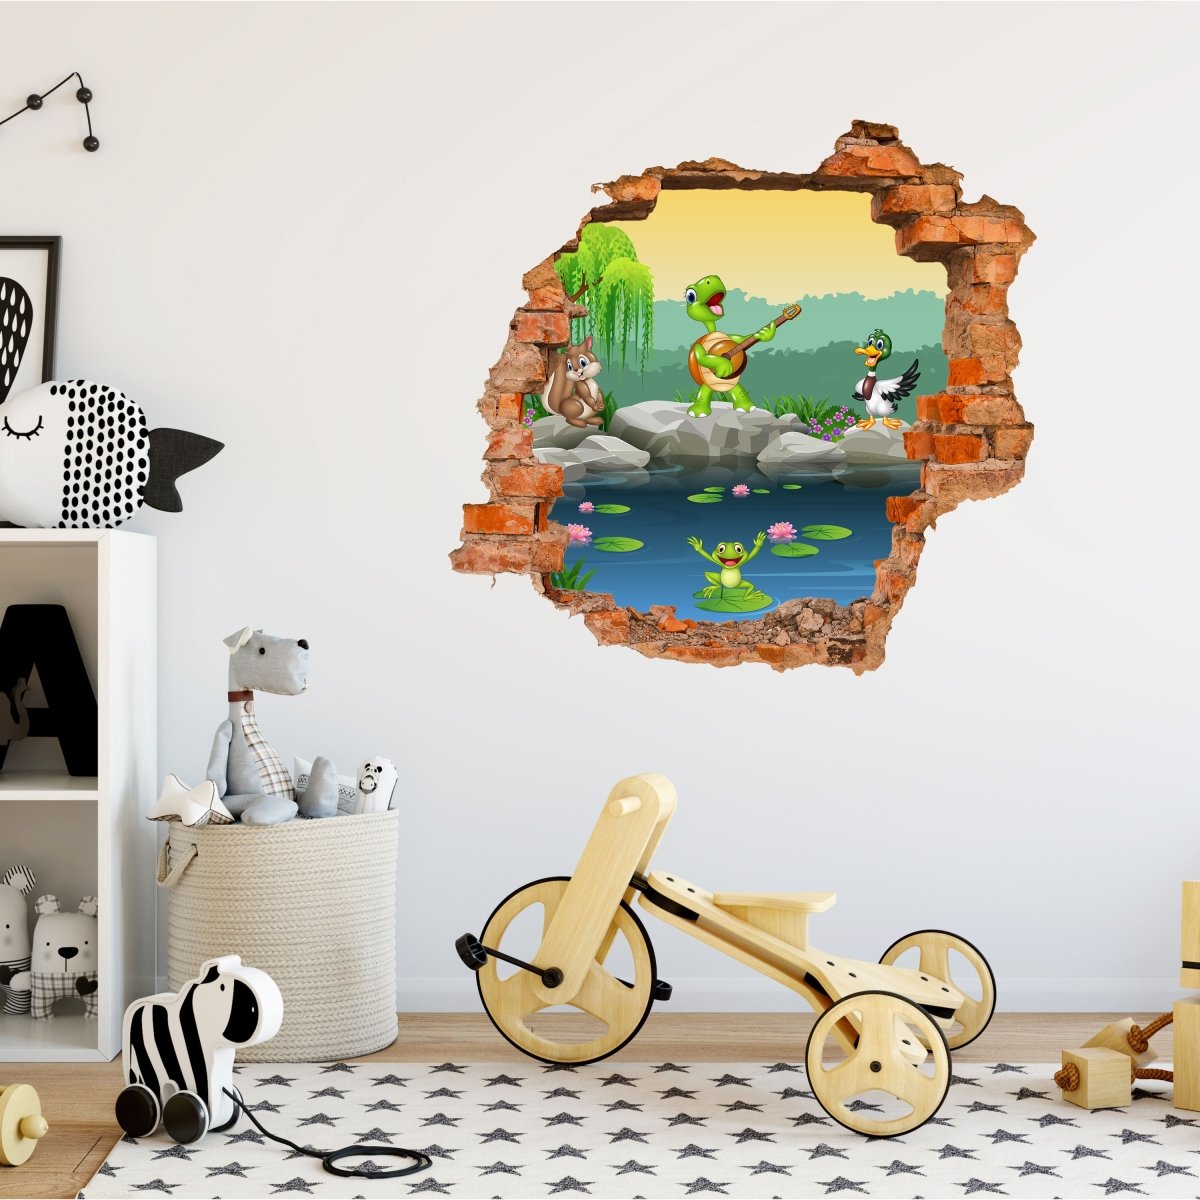 3D wall sticker animals at the pond, frog, turtle - Wall Decal M1219